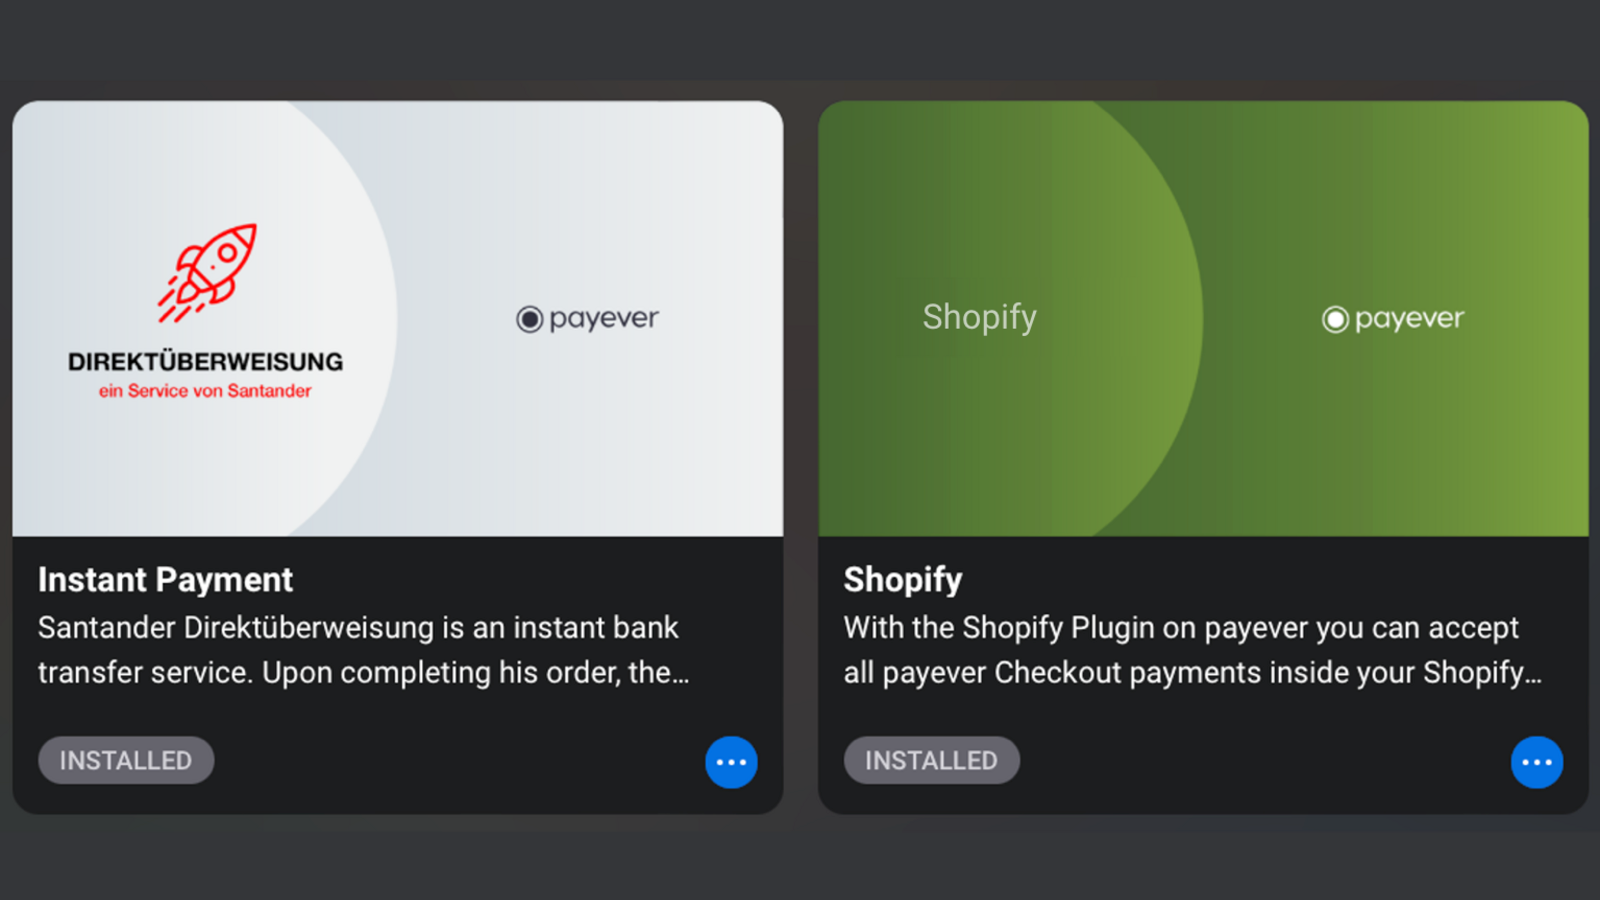 Instant Payment and Shopify Apps in payever